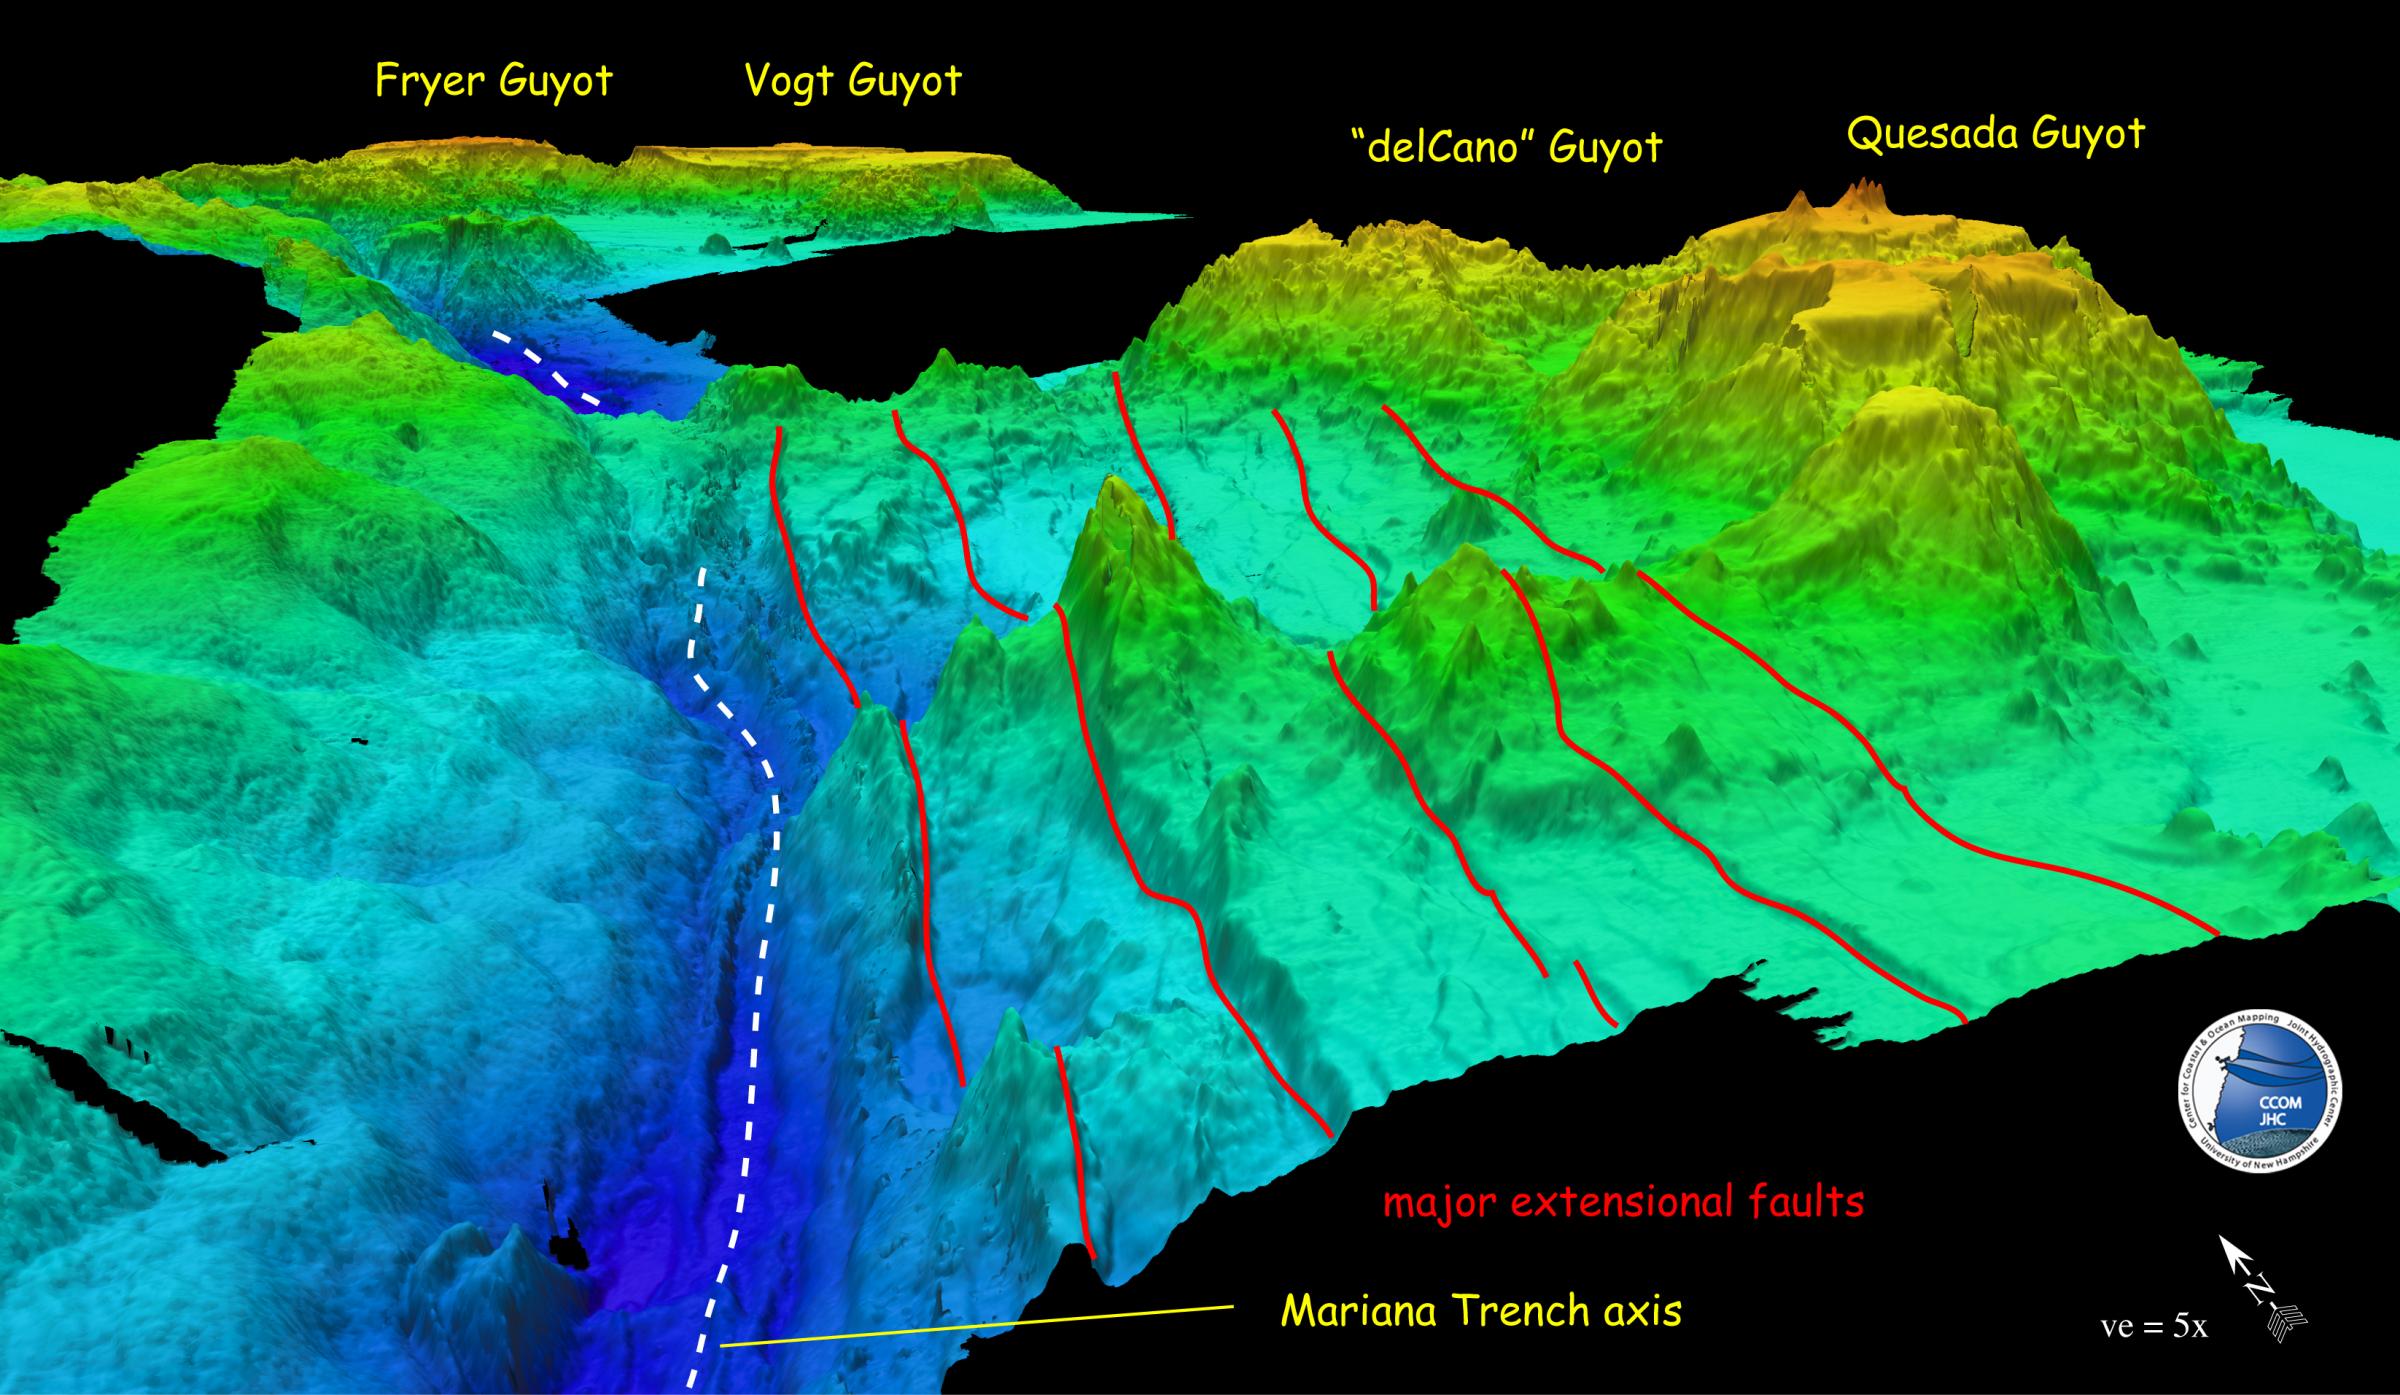 Bathymetry image showing Mariana Trench - Guyots Carried into the Trenc